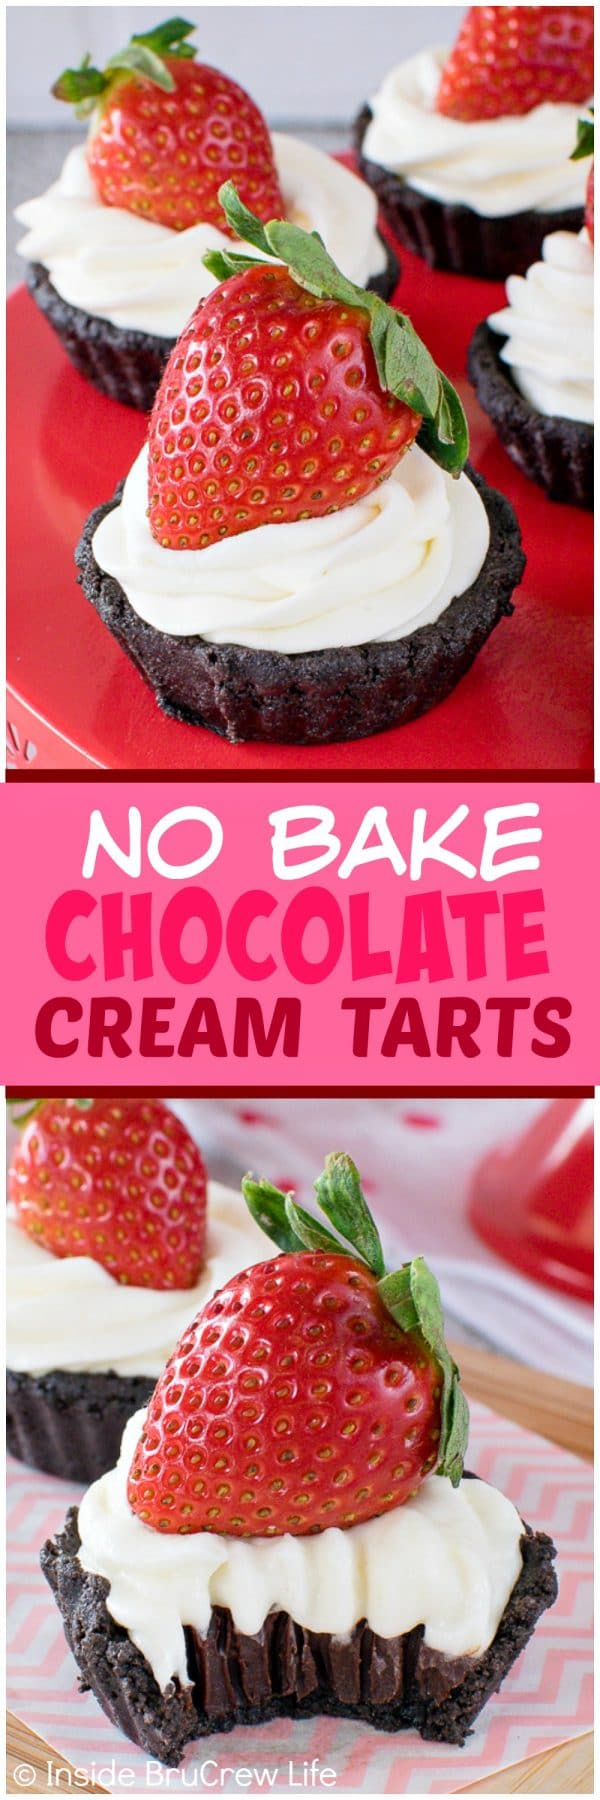 2 pictures of small chocolate tarts topped with cool whip and a strawberry.